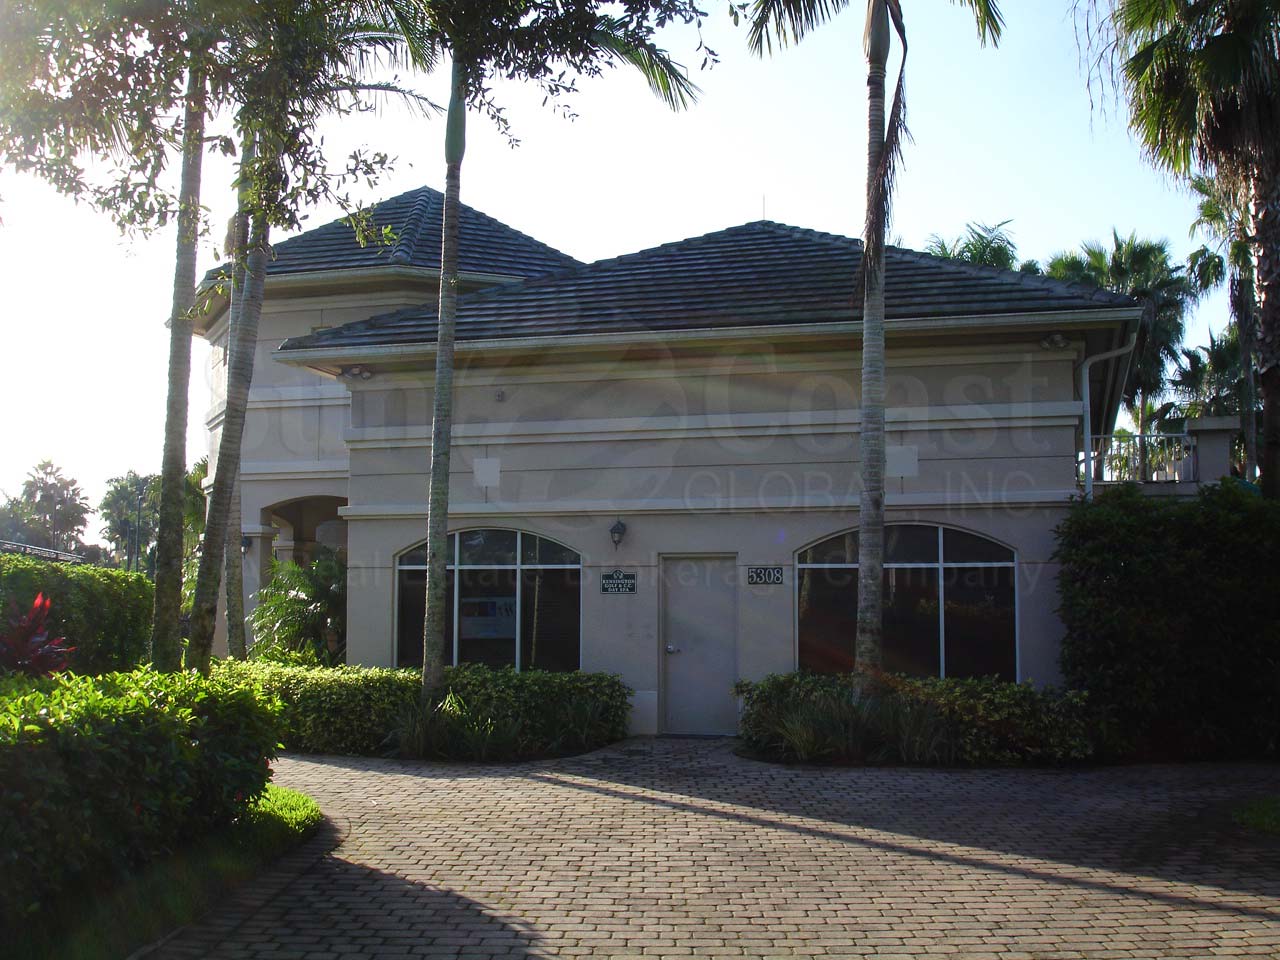 KENSINGTON Golf and Country Club spa and fitness center